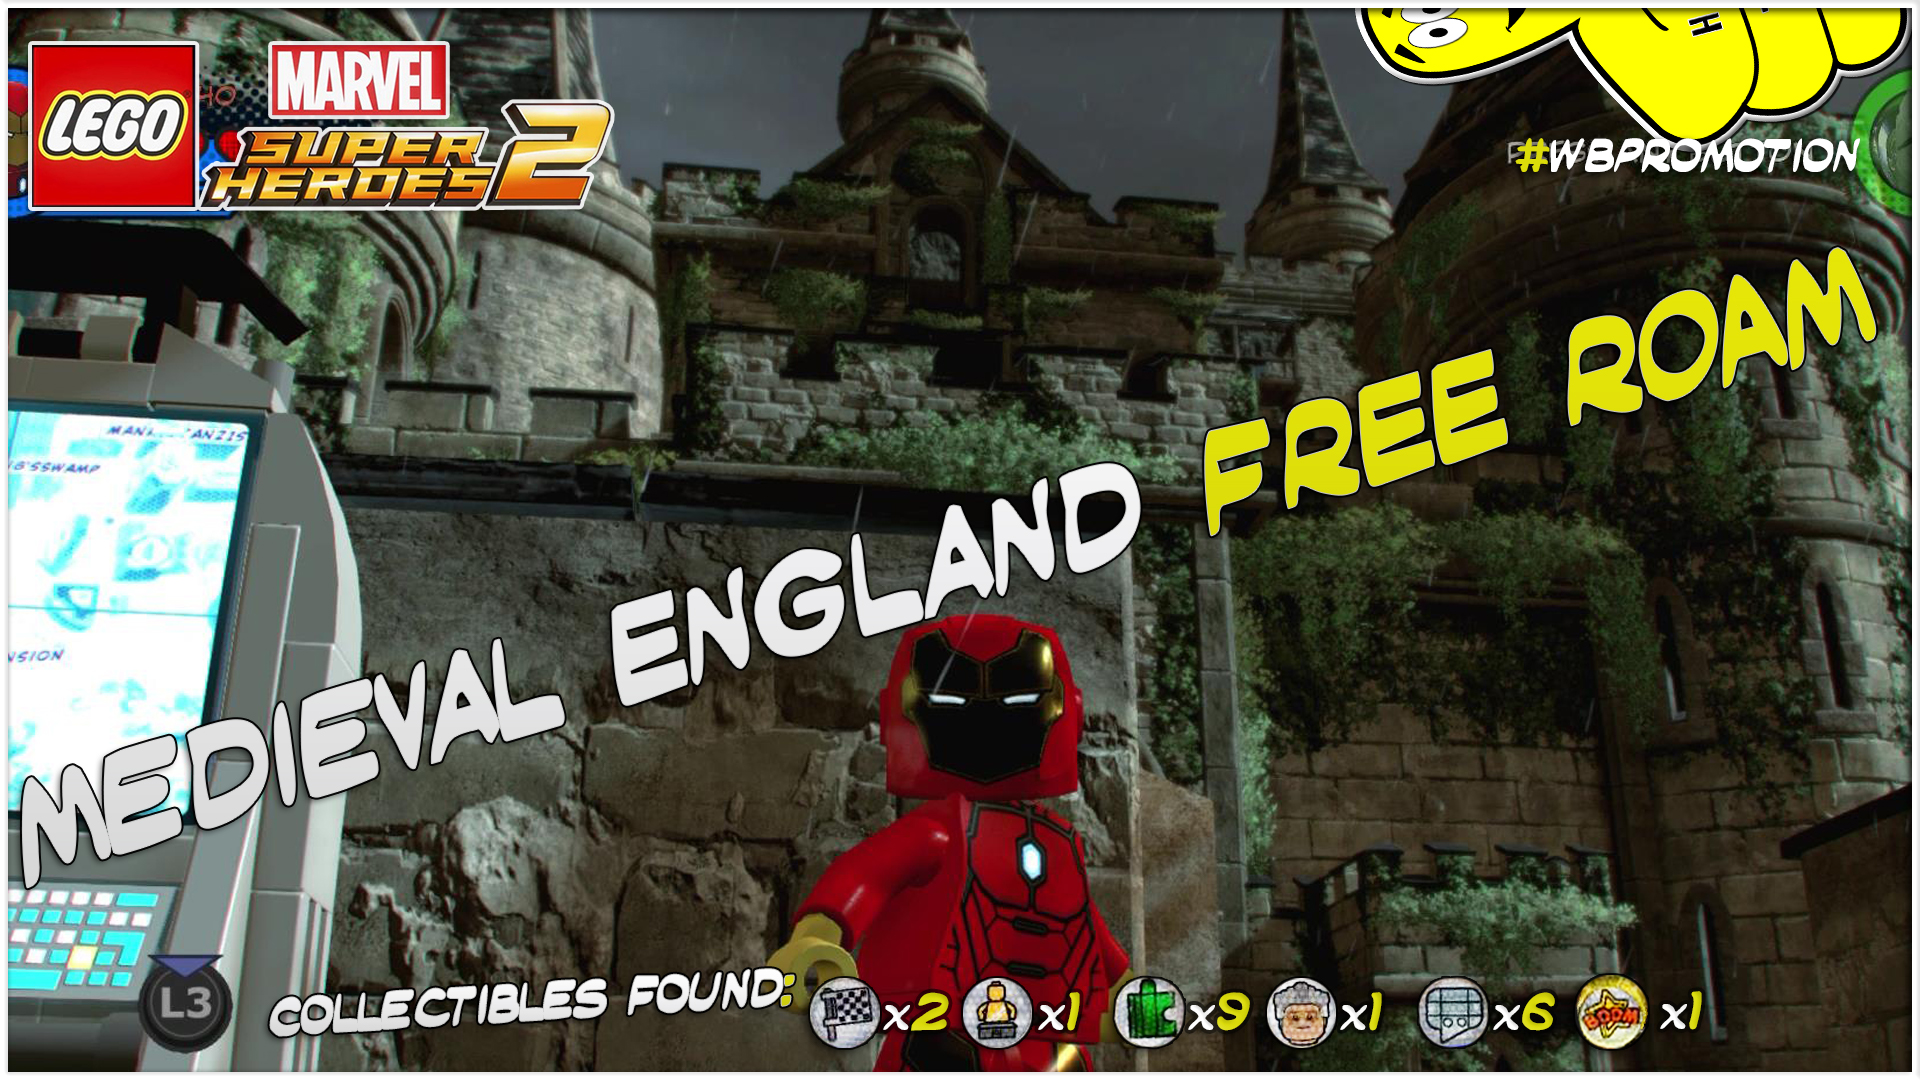 Lego Marvel Superheroes 2: Medieval England FREE ROAM (All Collectibles) – HTG